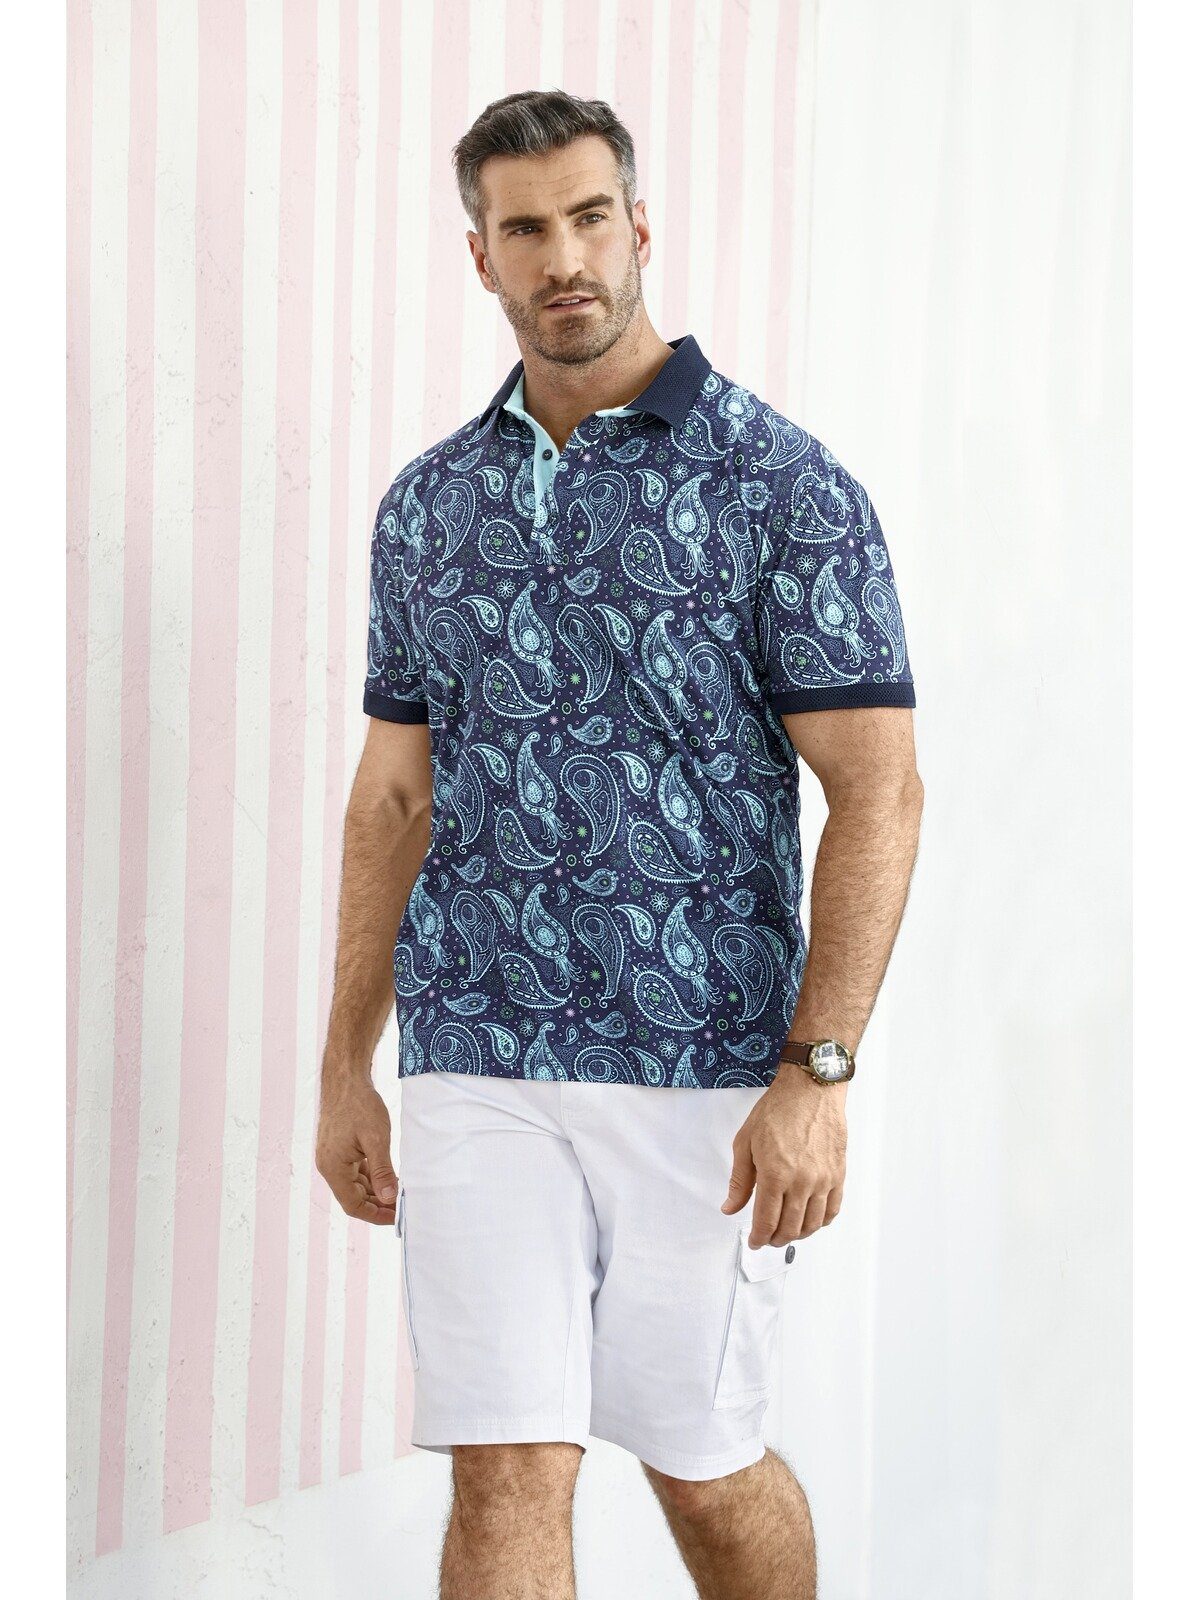 Herren Poloshirts Charles Colby Poloshirt EARL SUITBERT Paisley Muster, Comfort Fit